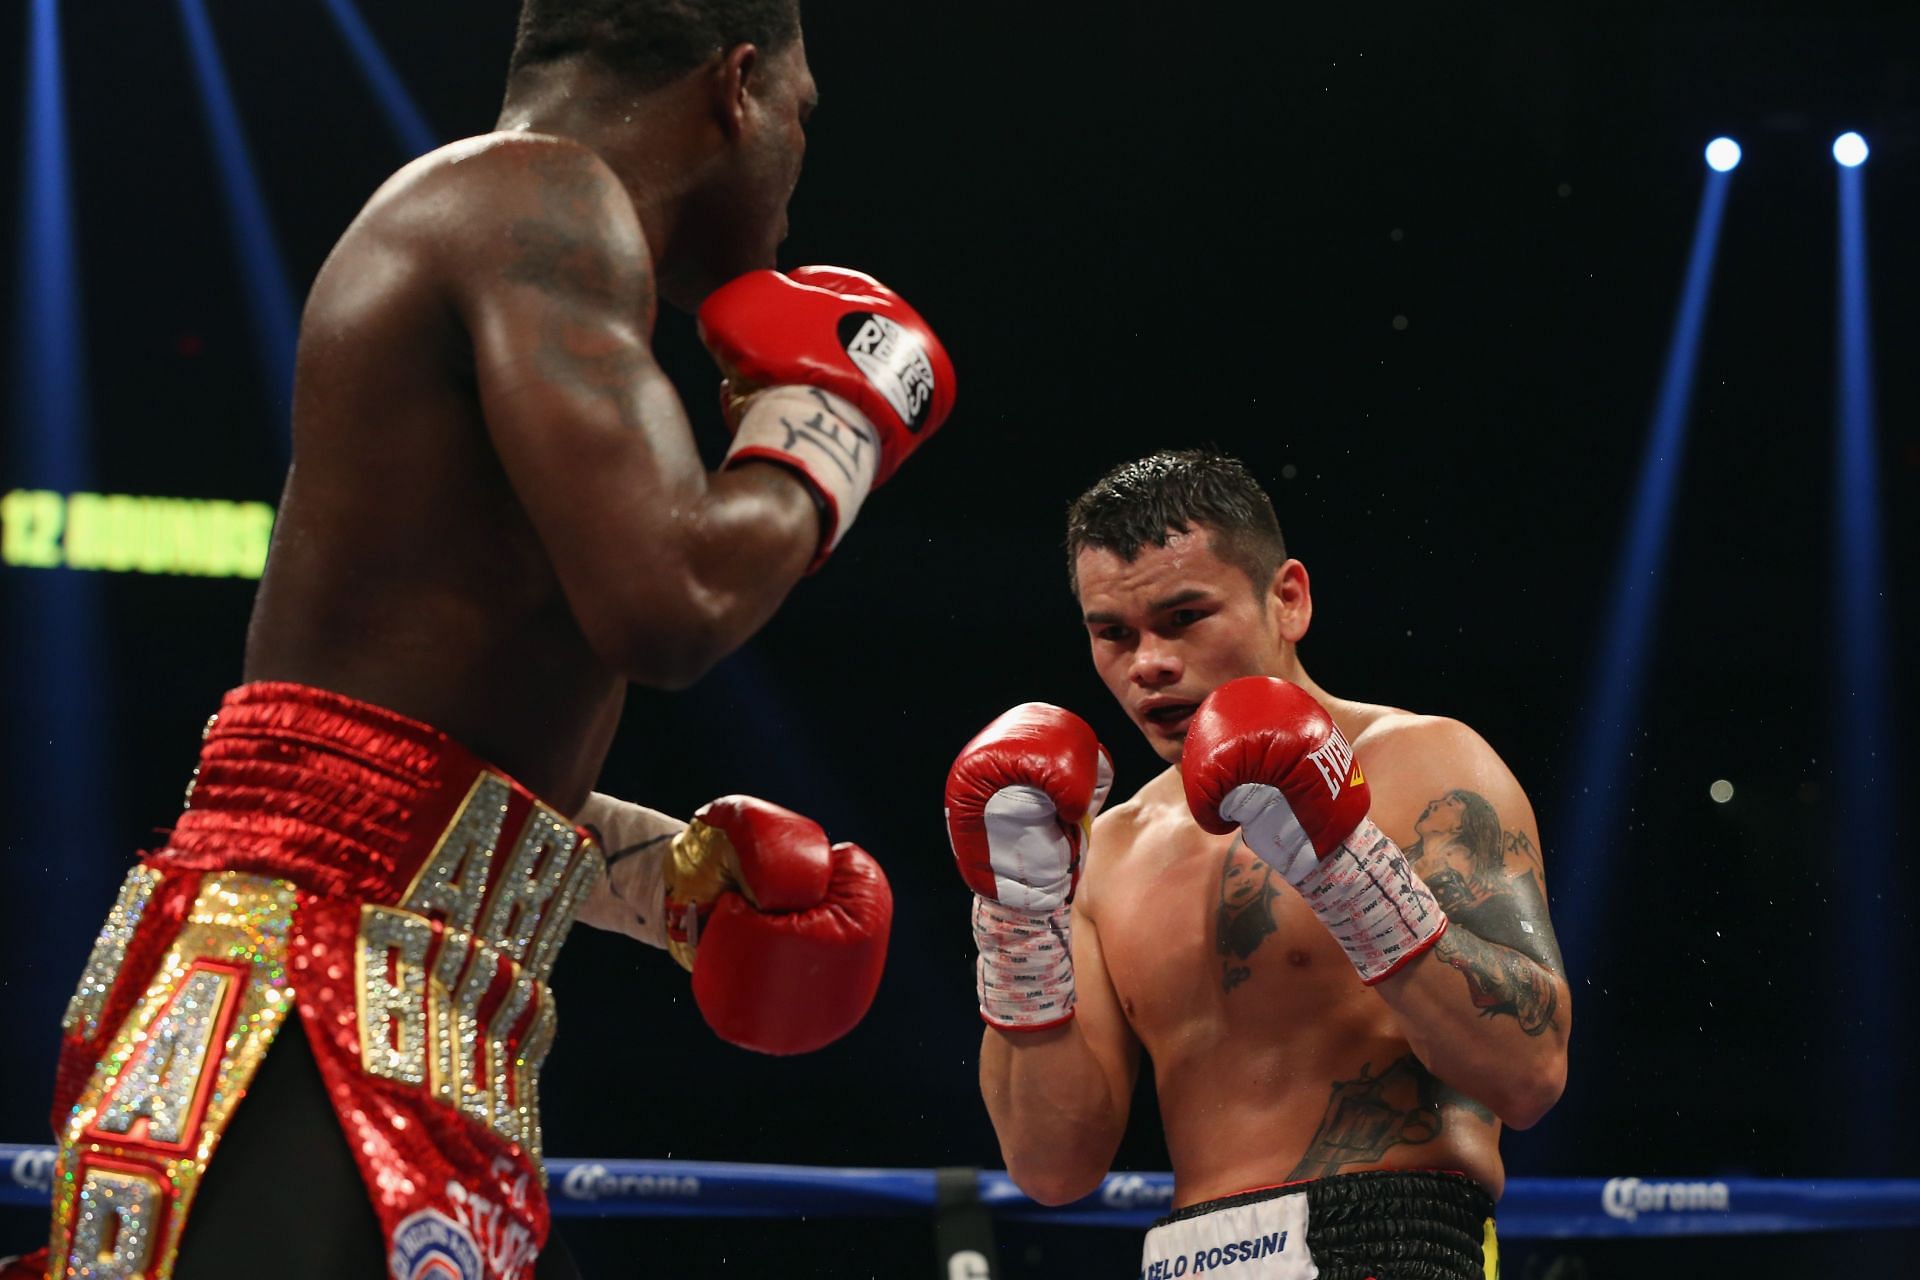 Marcos Maidana wants to rematch Adrien Broner in an exhibition – “We always talk about that”